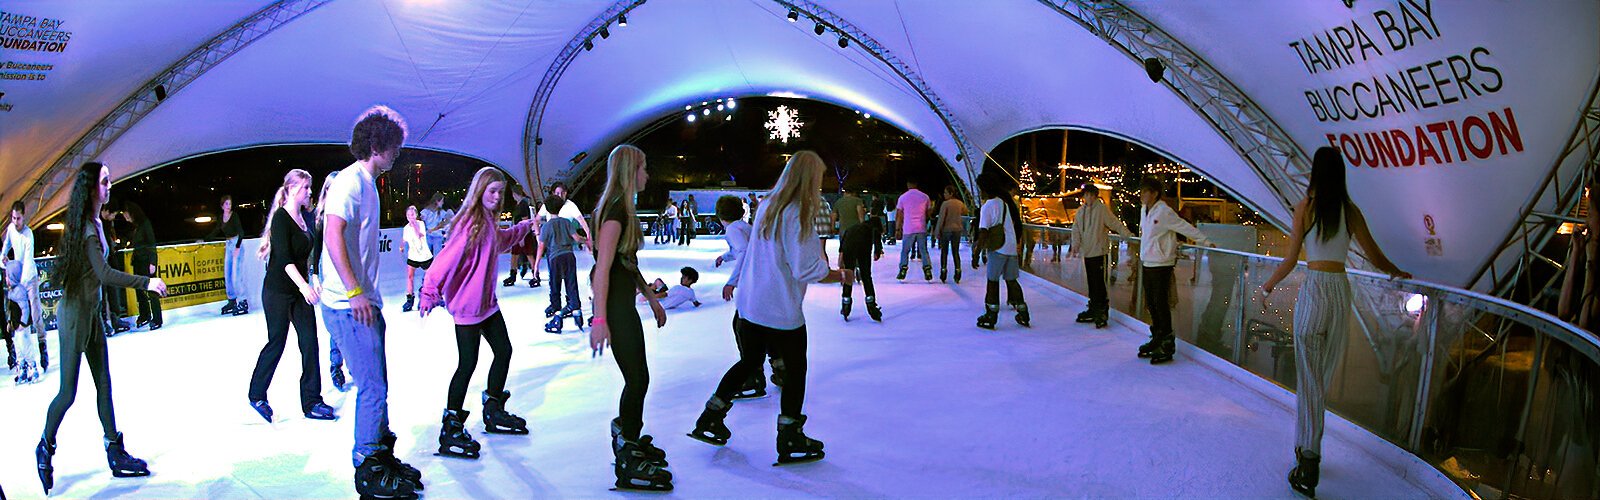 People skate into the holiday season at the Winter Village at Curtis Hixon Waterfront Park in downtown Tampa.